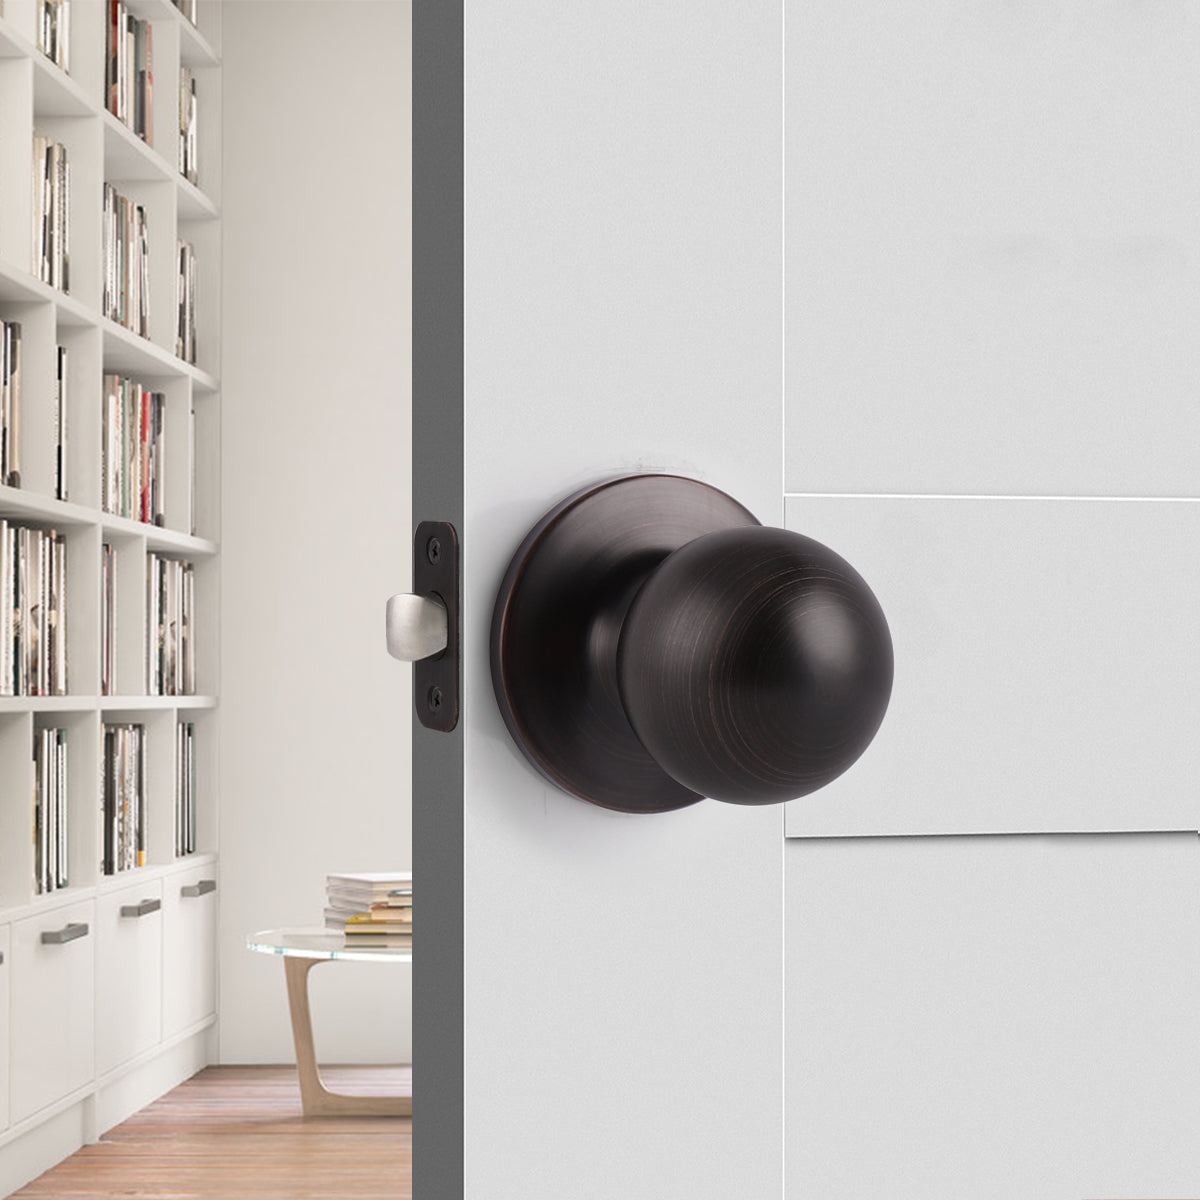 Round Ball Door Knobs Keyledd Passage Function for Closet Hall, Oil Rubbed Bronze Finish- DL5763ORBPS